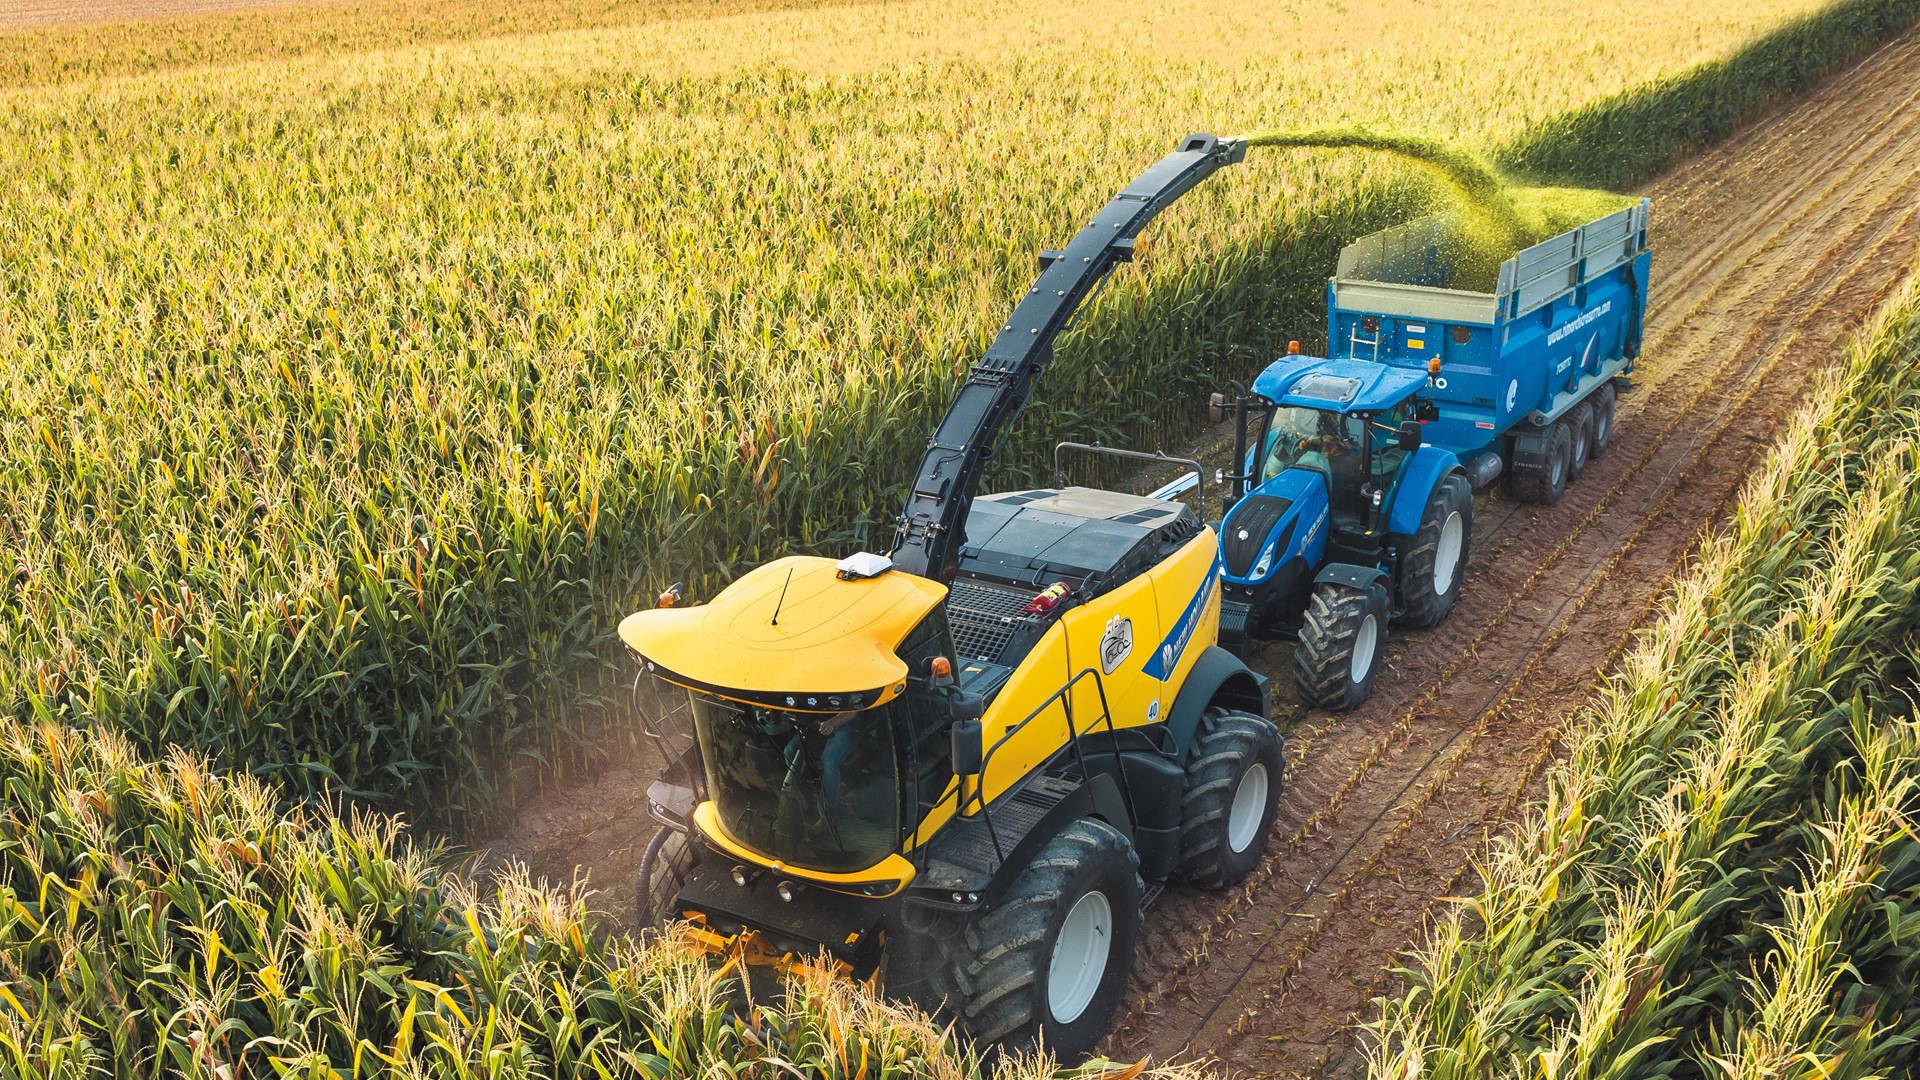 New Holland celebrates 60th Anniversary of self-propelled forage harvester